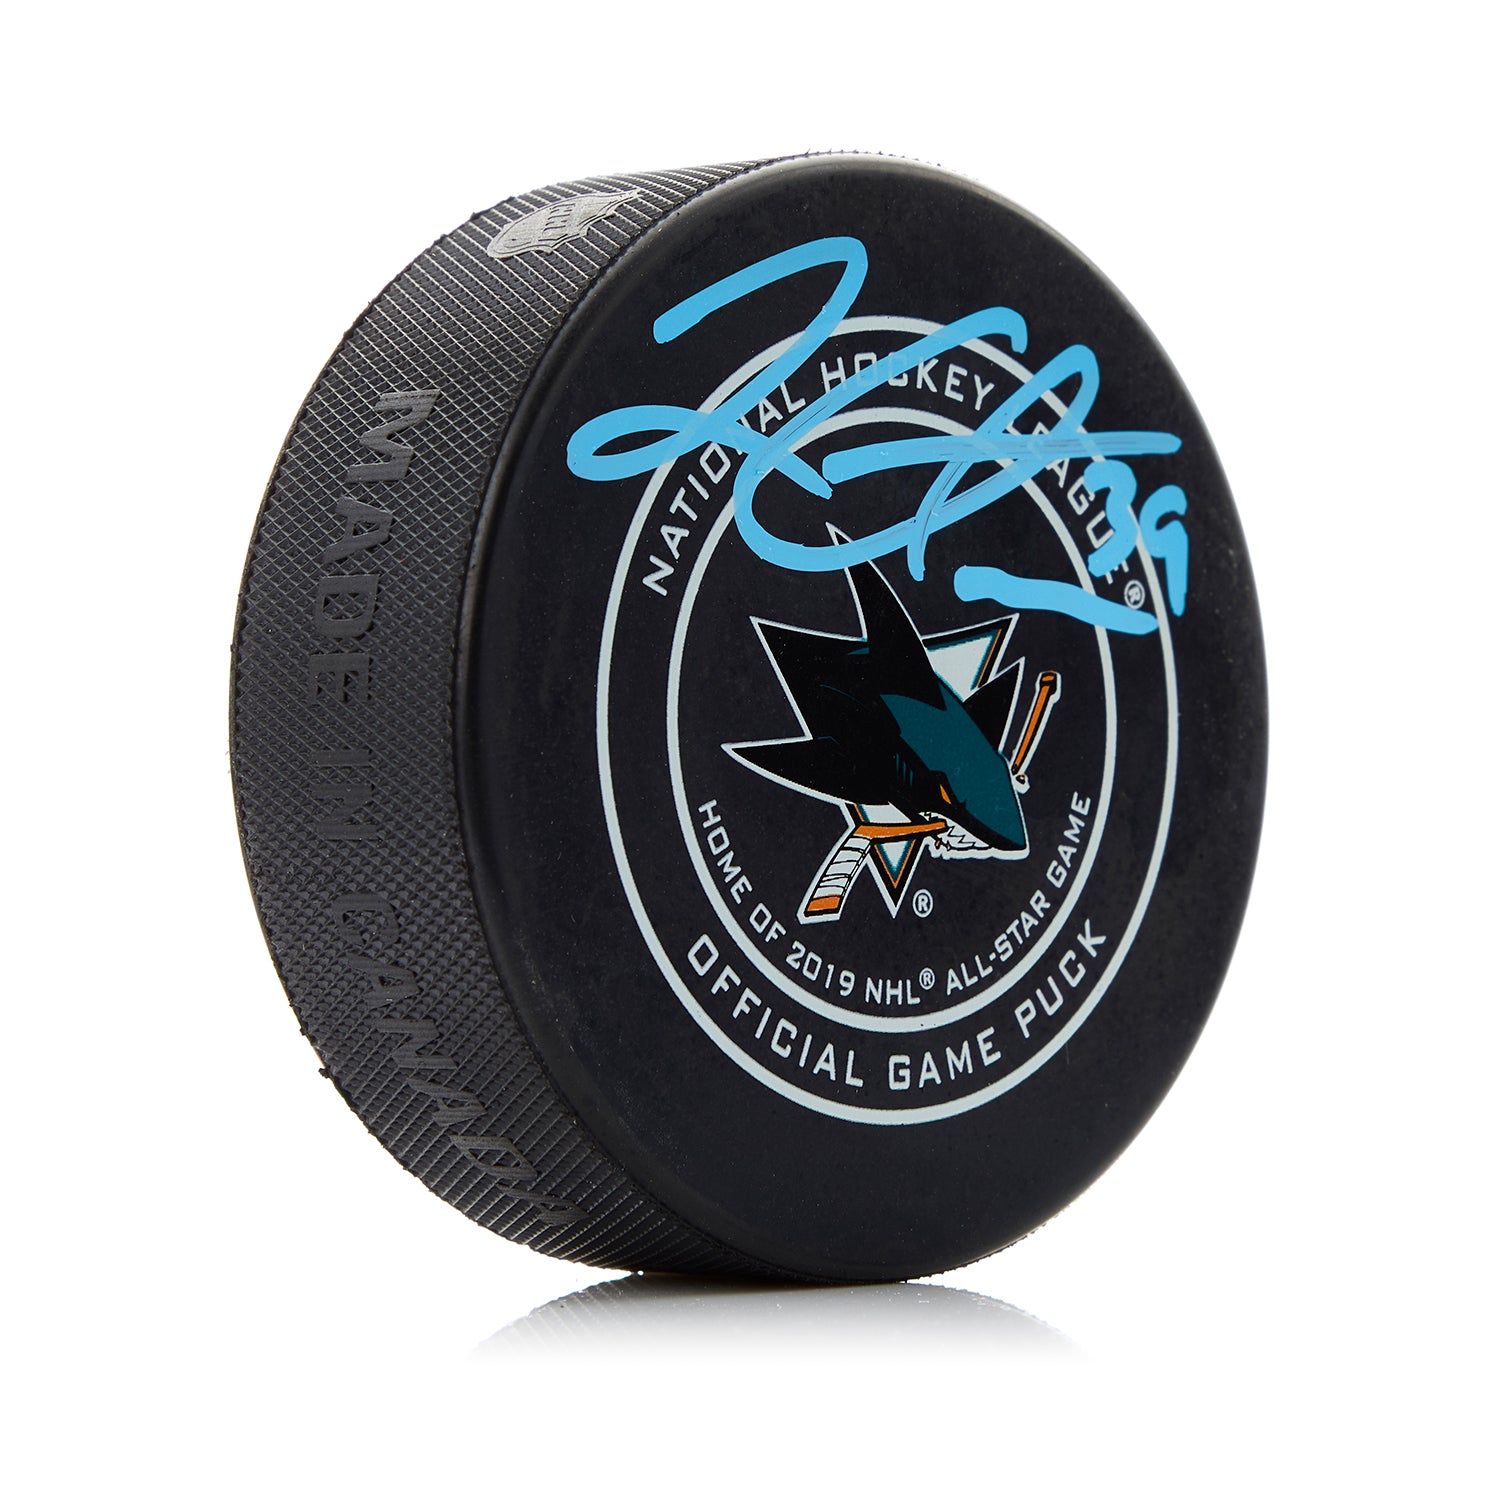 Logan Couture Autographed San Jose Sharks Official Game Puck